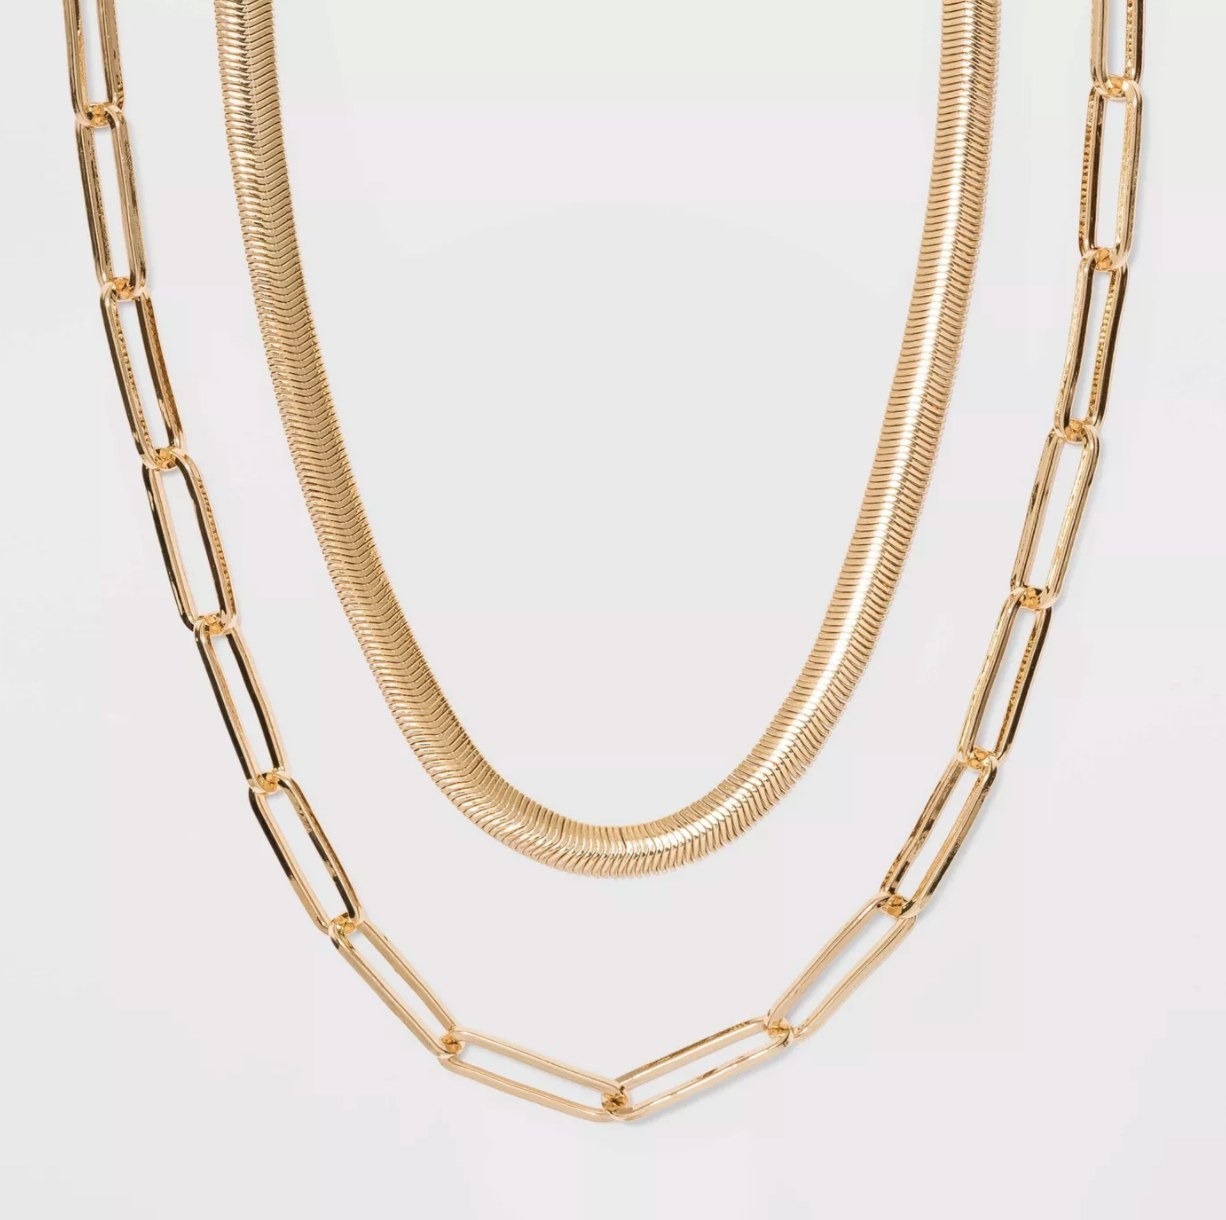 The gold necklace set